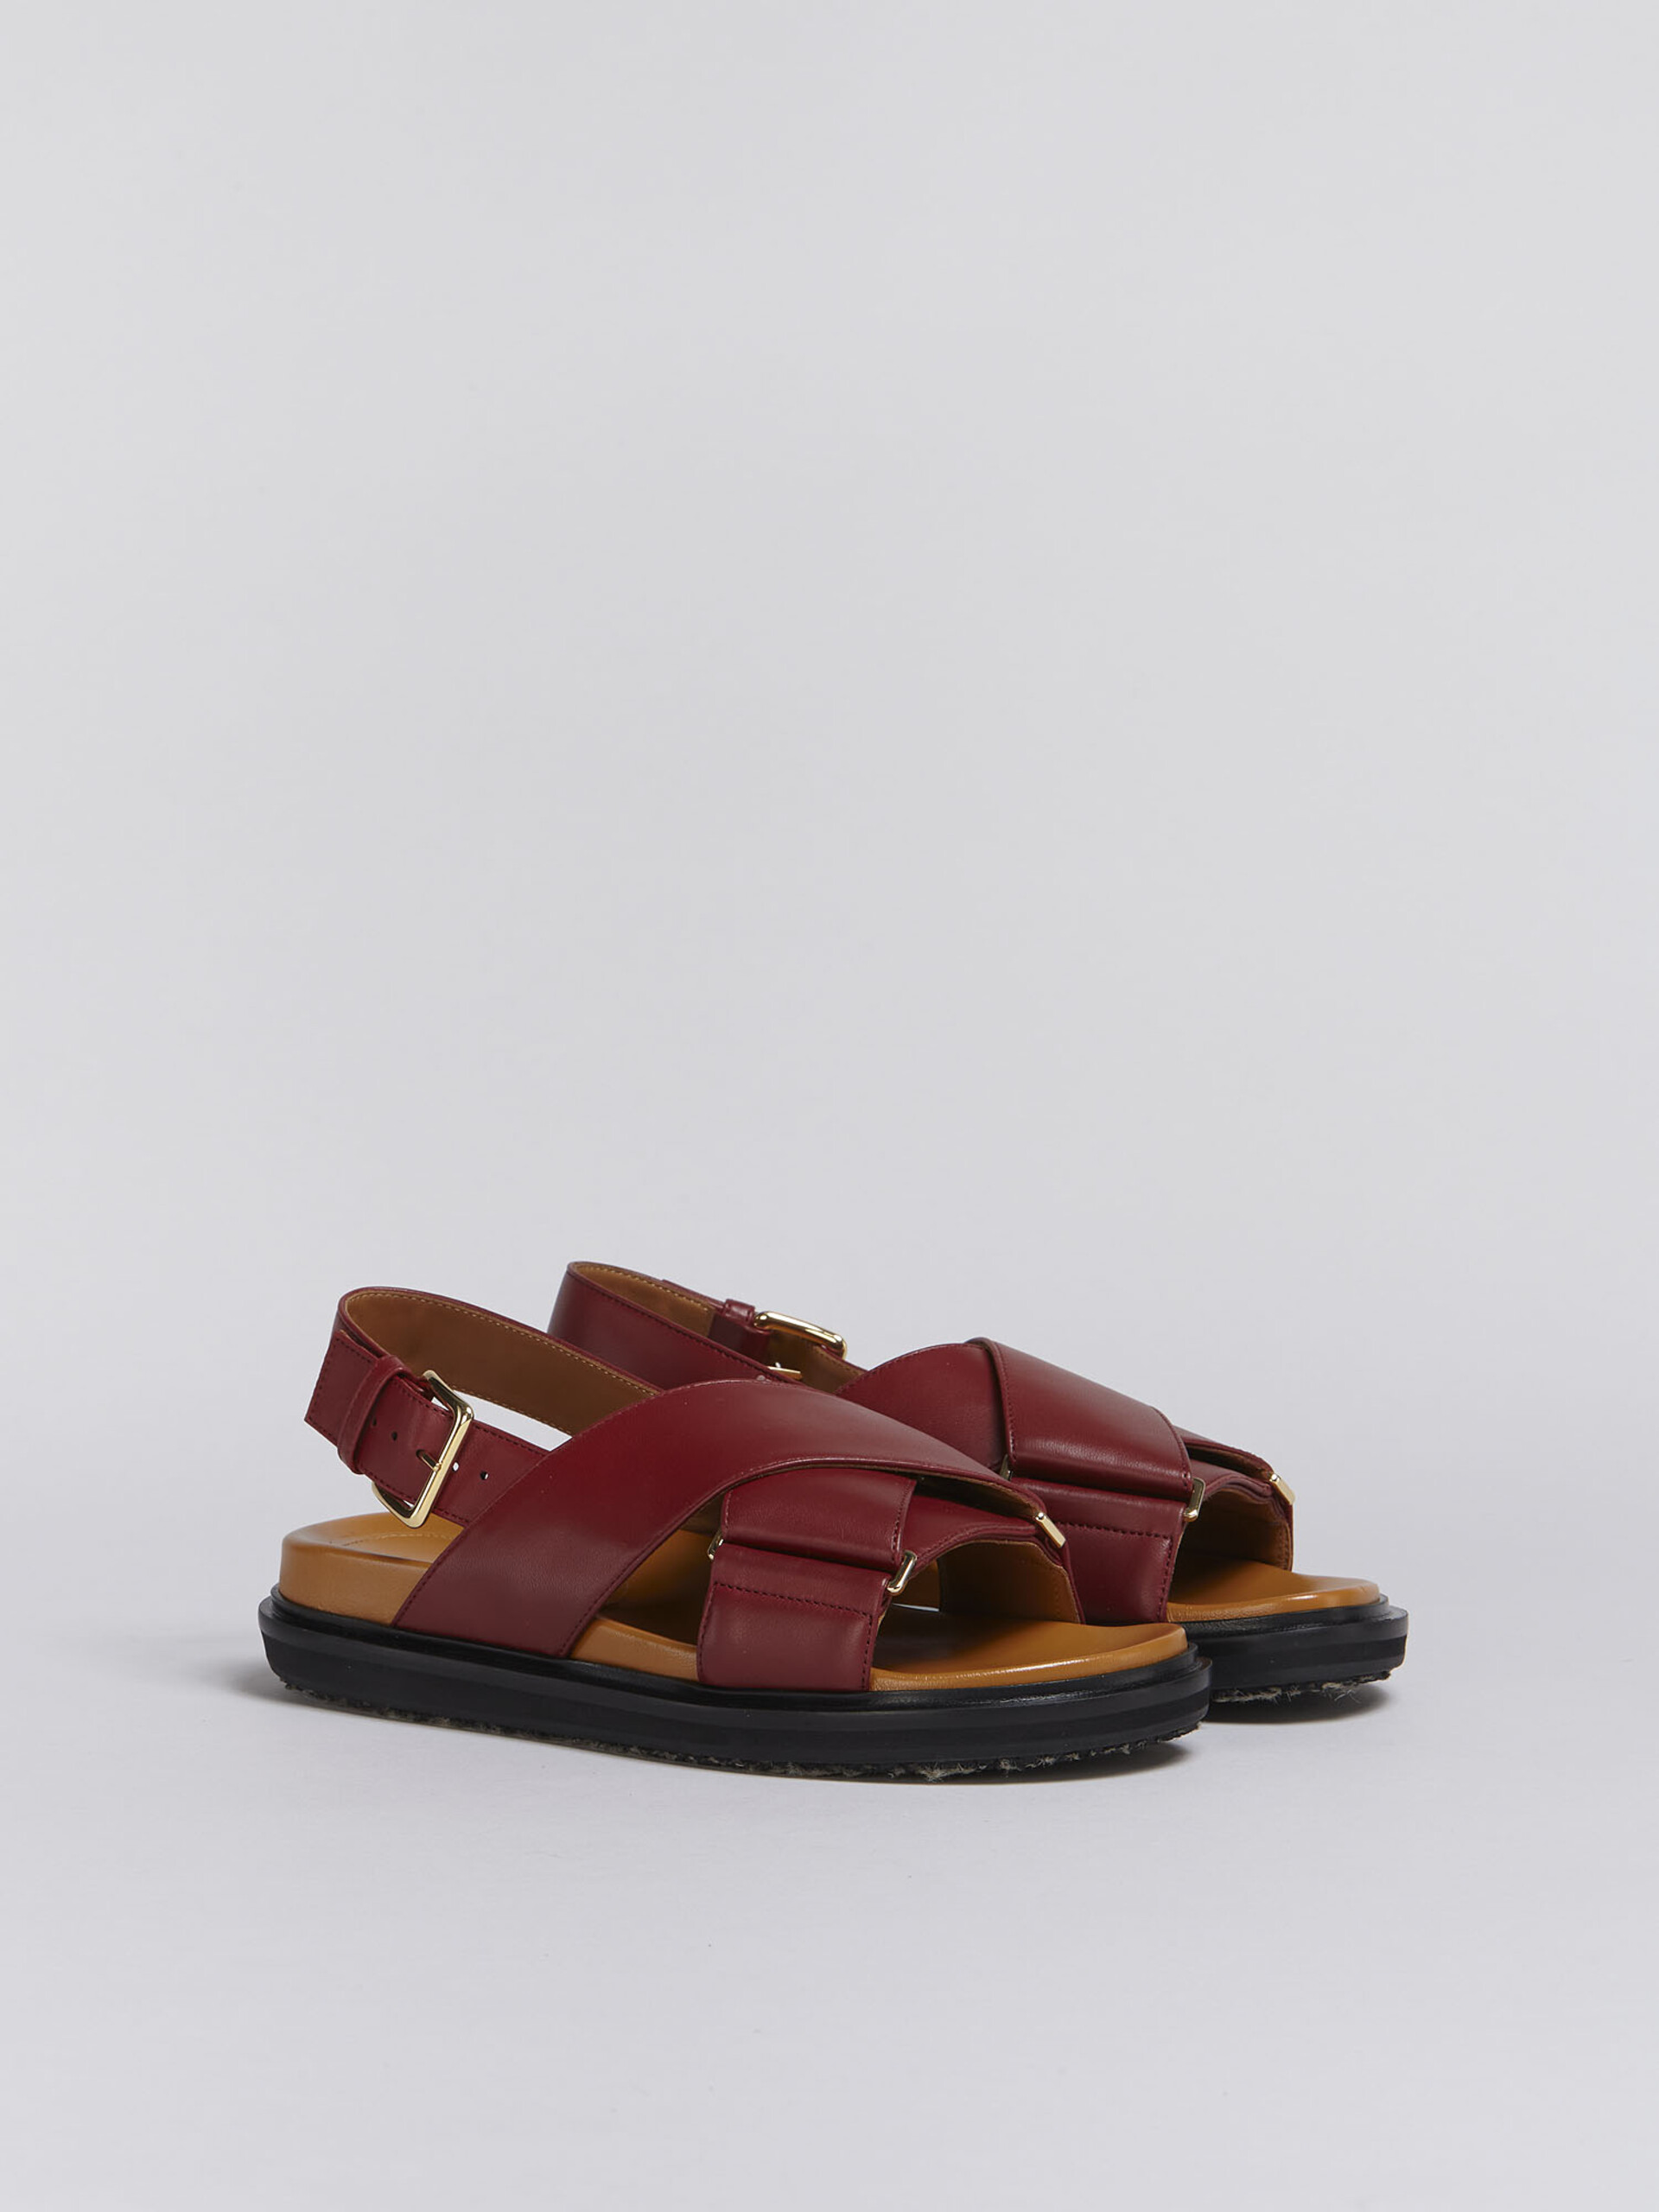 Red leather fussbett - Sandals - Image 2